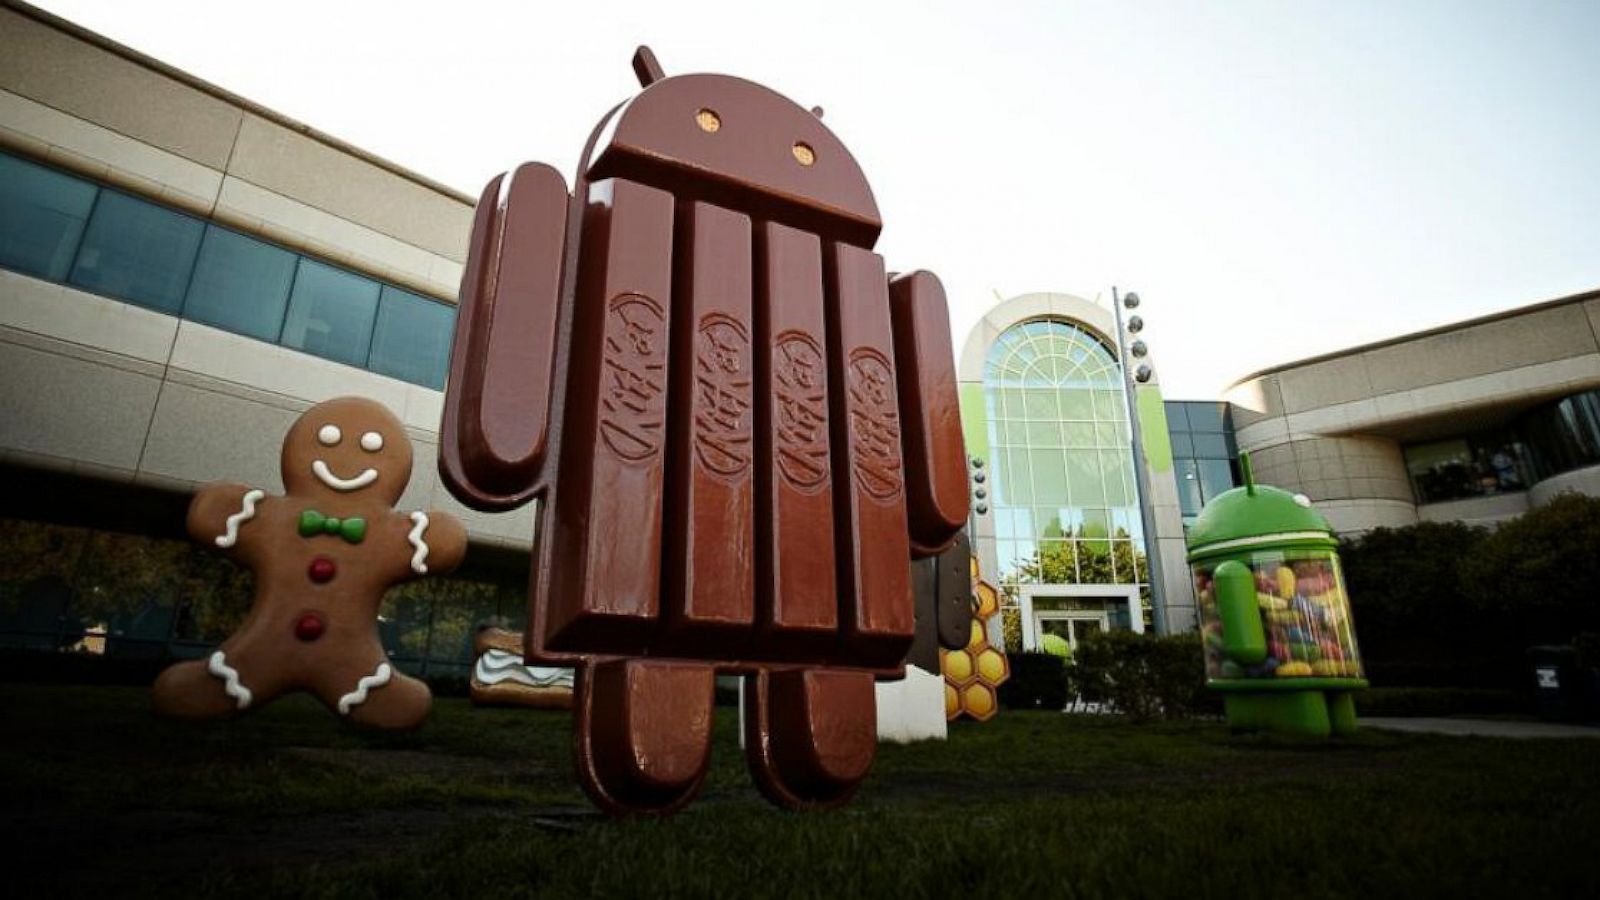 Android KitKat  Android Developers